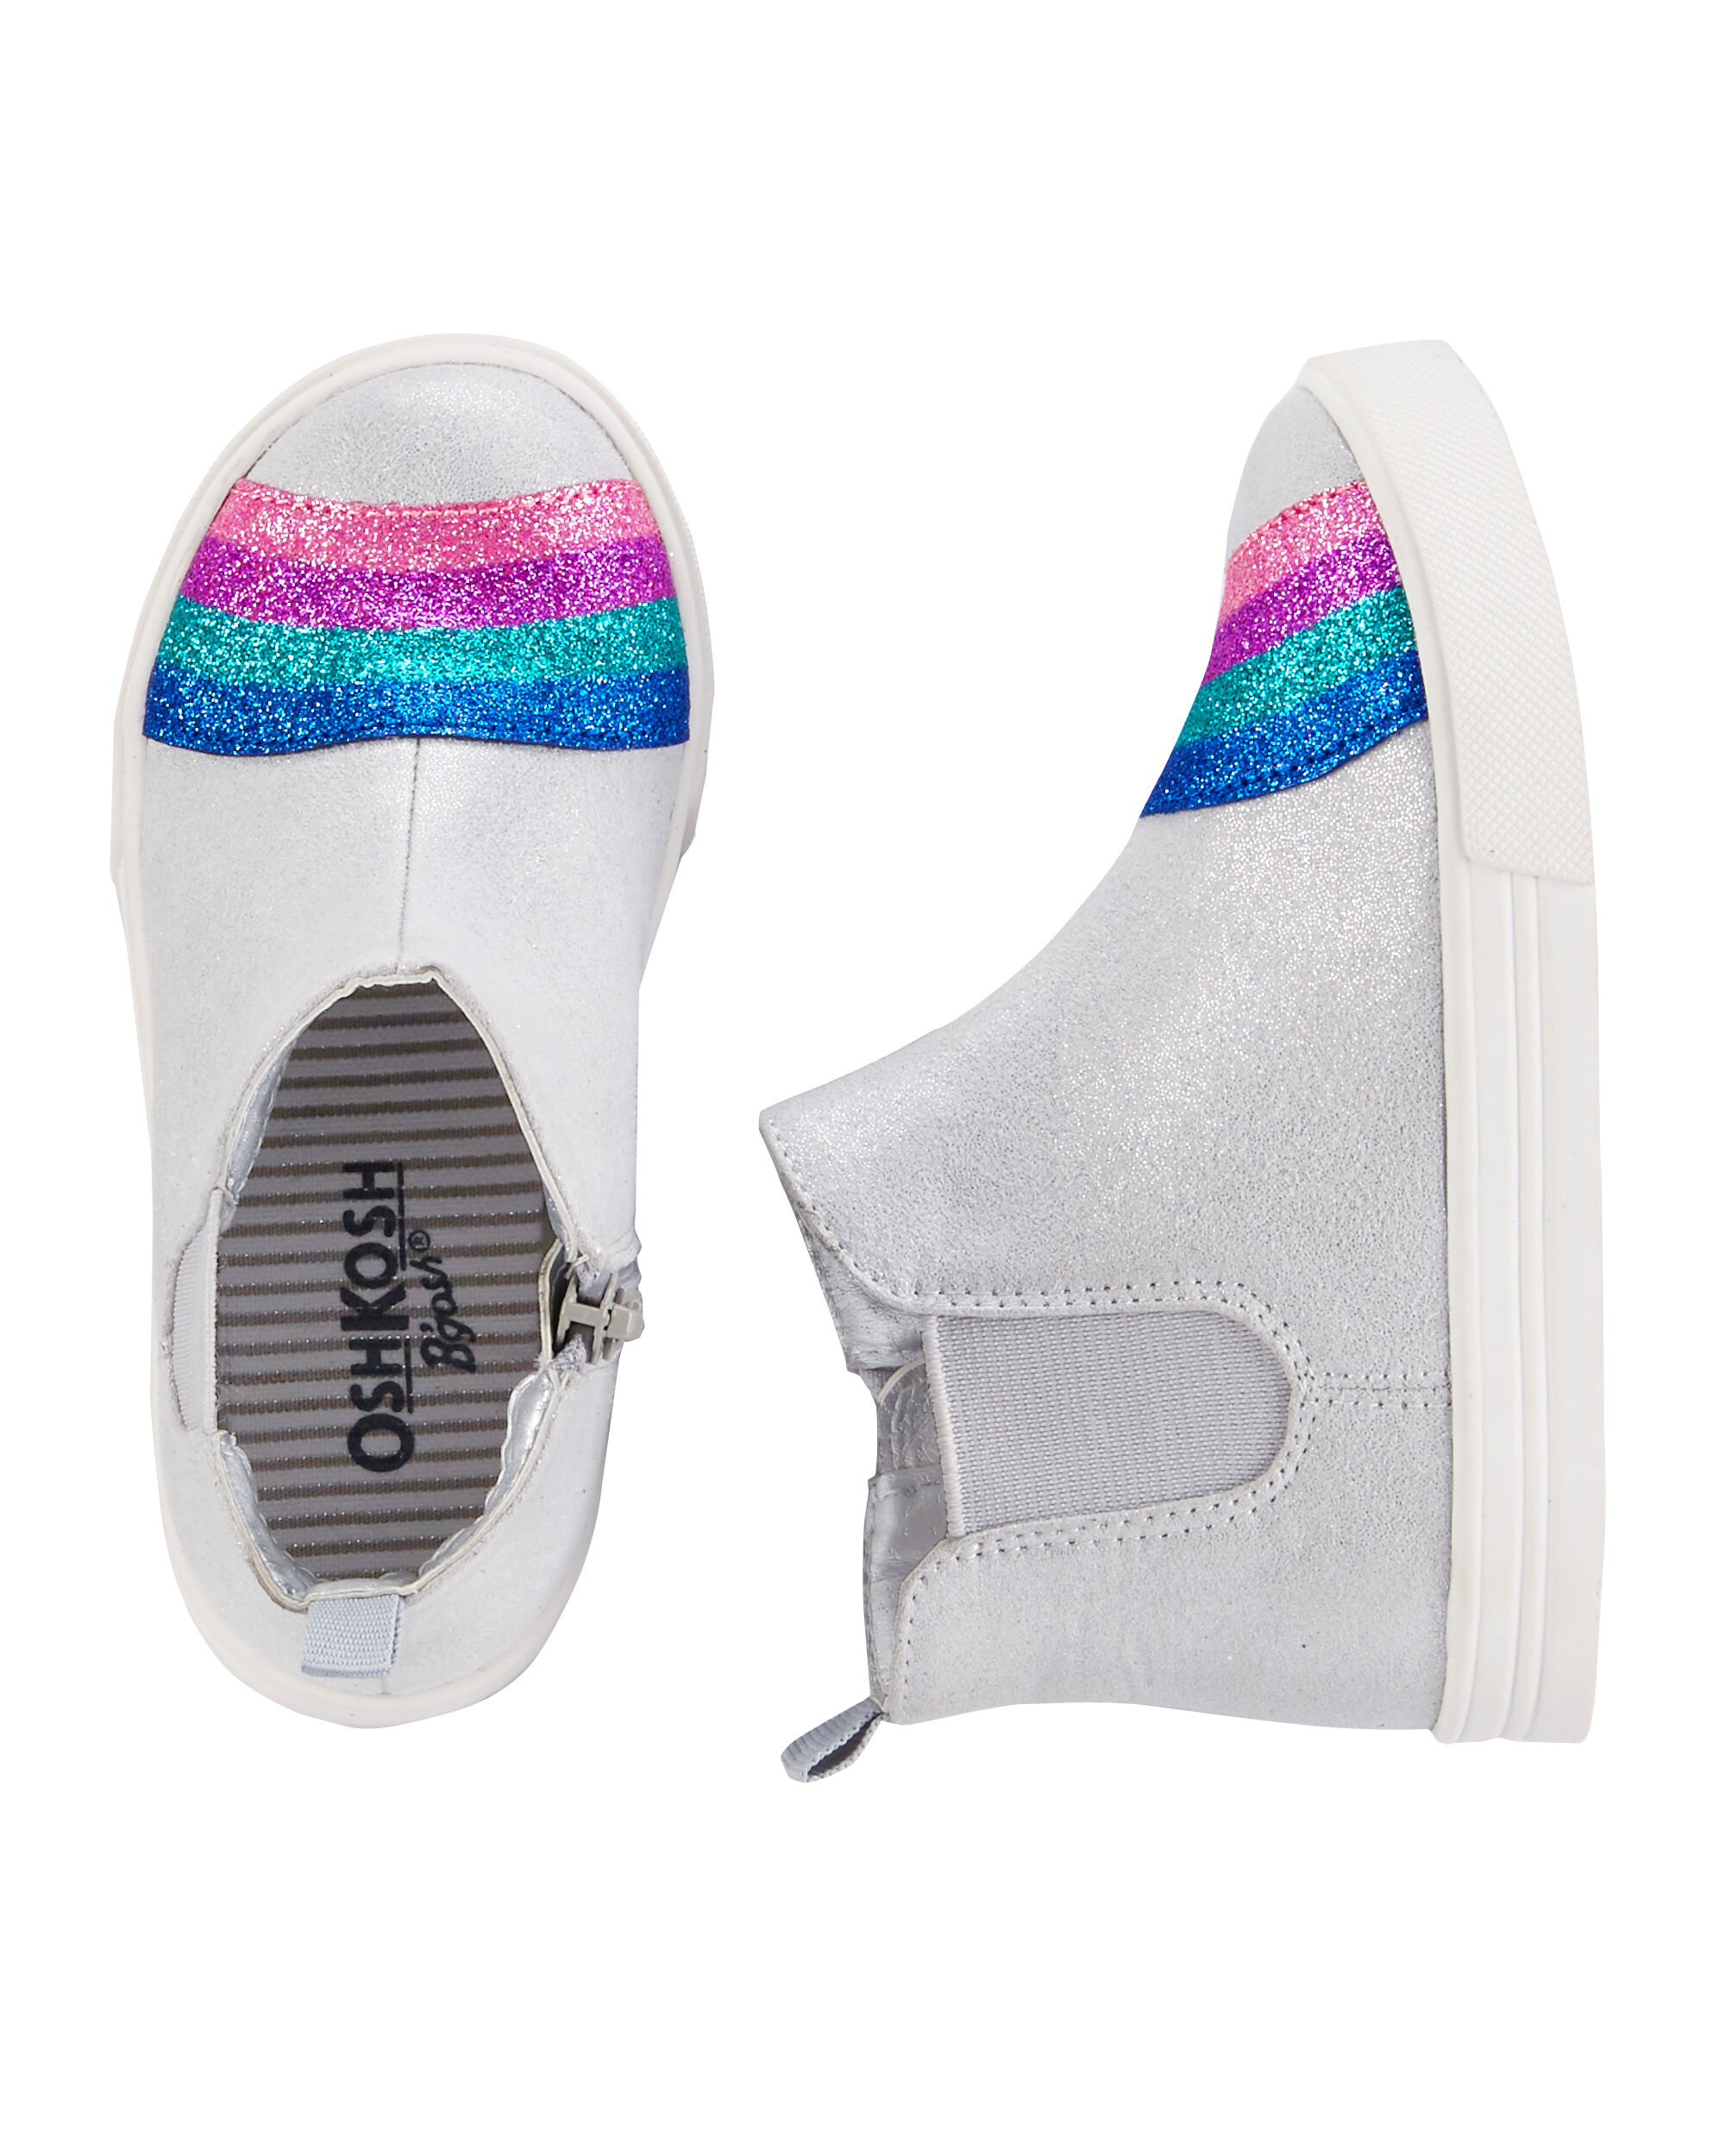 carters rainbow shoes